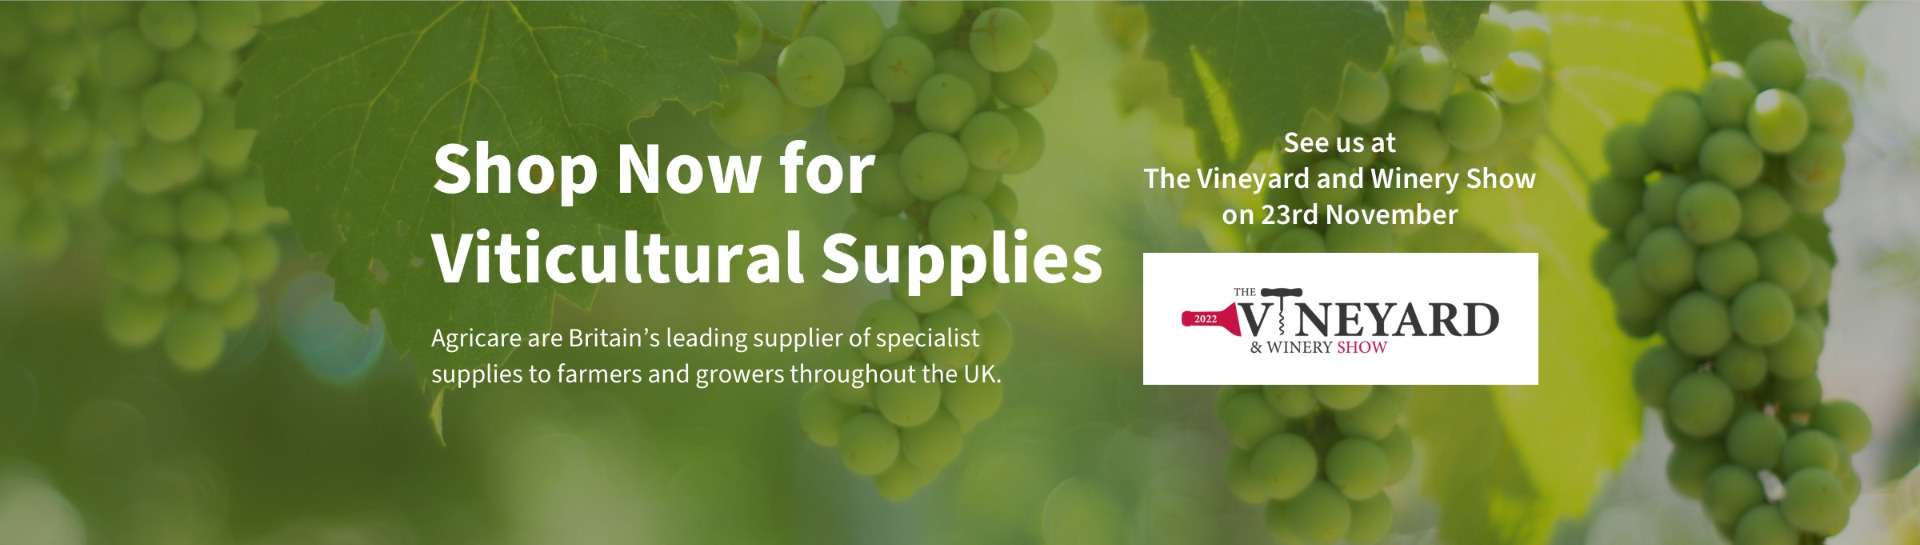 Shop Now for Viticultural Supplies. Agricare are Britain's leading supplier of specialist supplies to farmers and growers throughout the UK